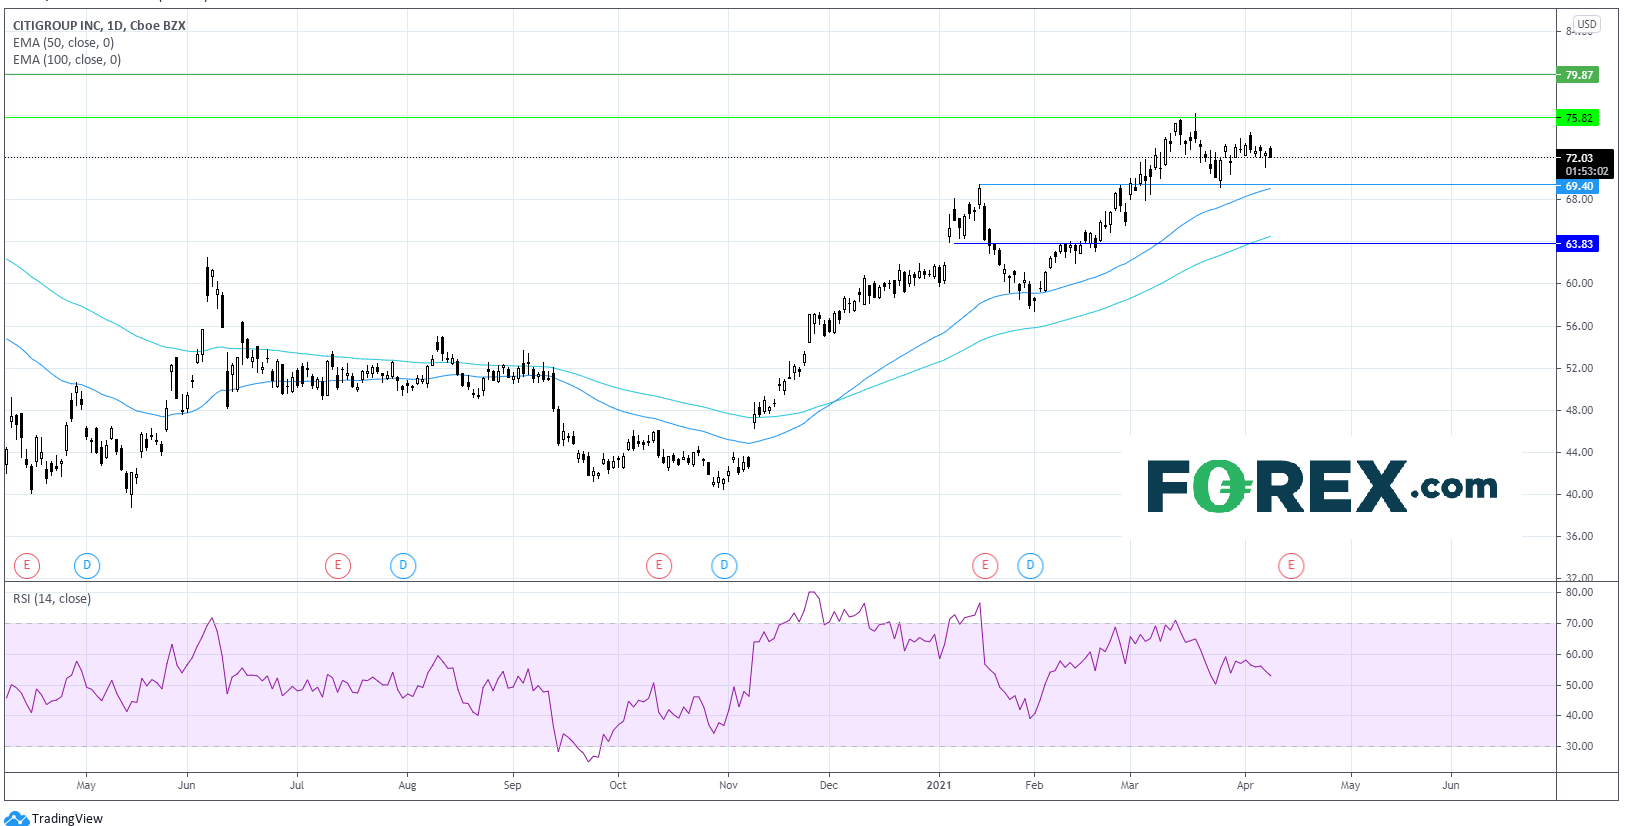 Chart analysis of CitiGroup U.S Q1 Bank Earnings. Published in April 2021 by FOREX.com